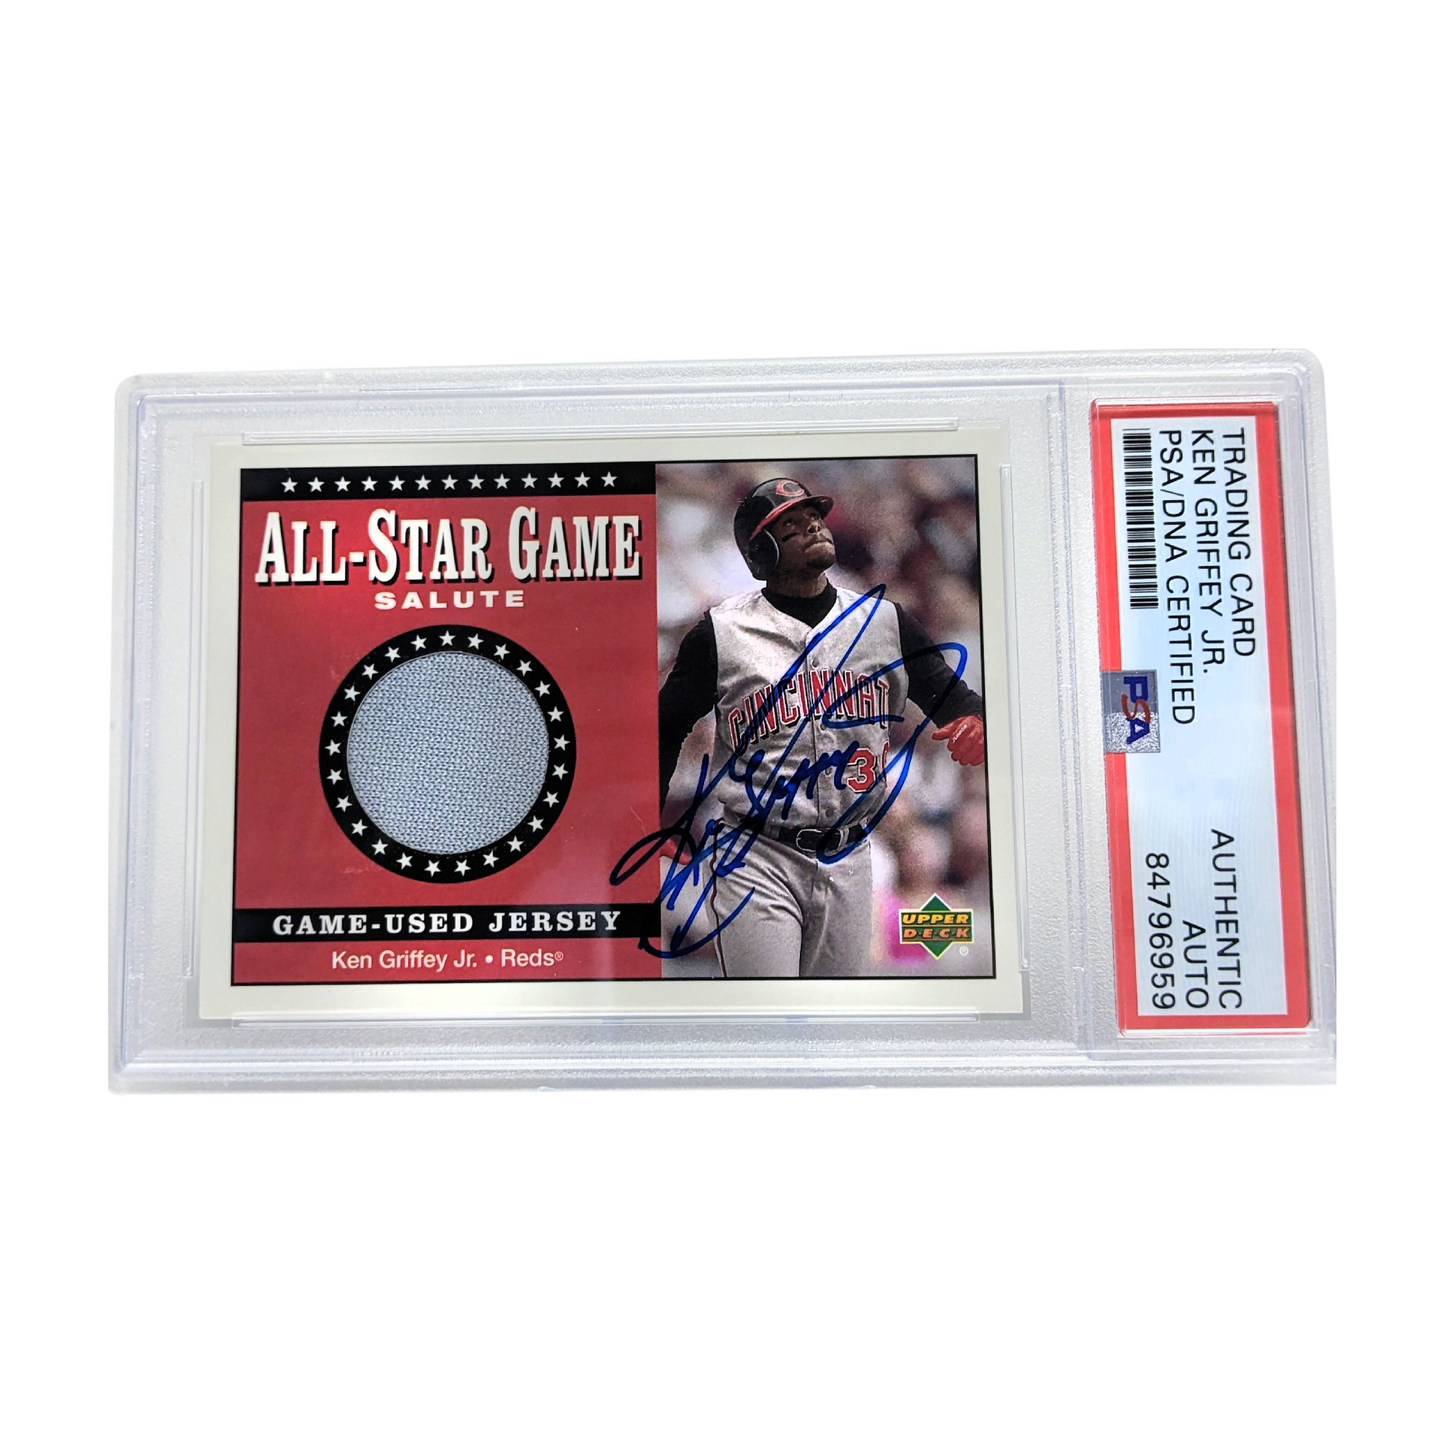 Ken Griffey Jr 2001 Upper Deck All Star Game Salute Game Used Jersey Relic Autographed Card - PSA Encapsulated Authentic Auto